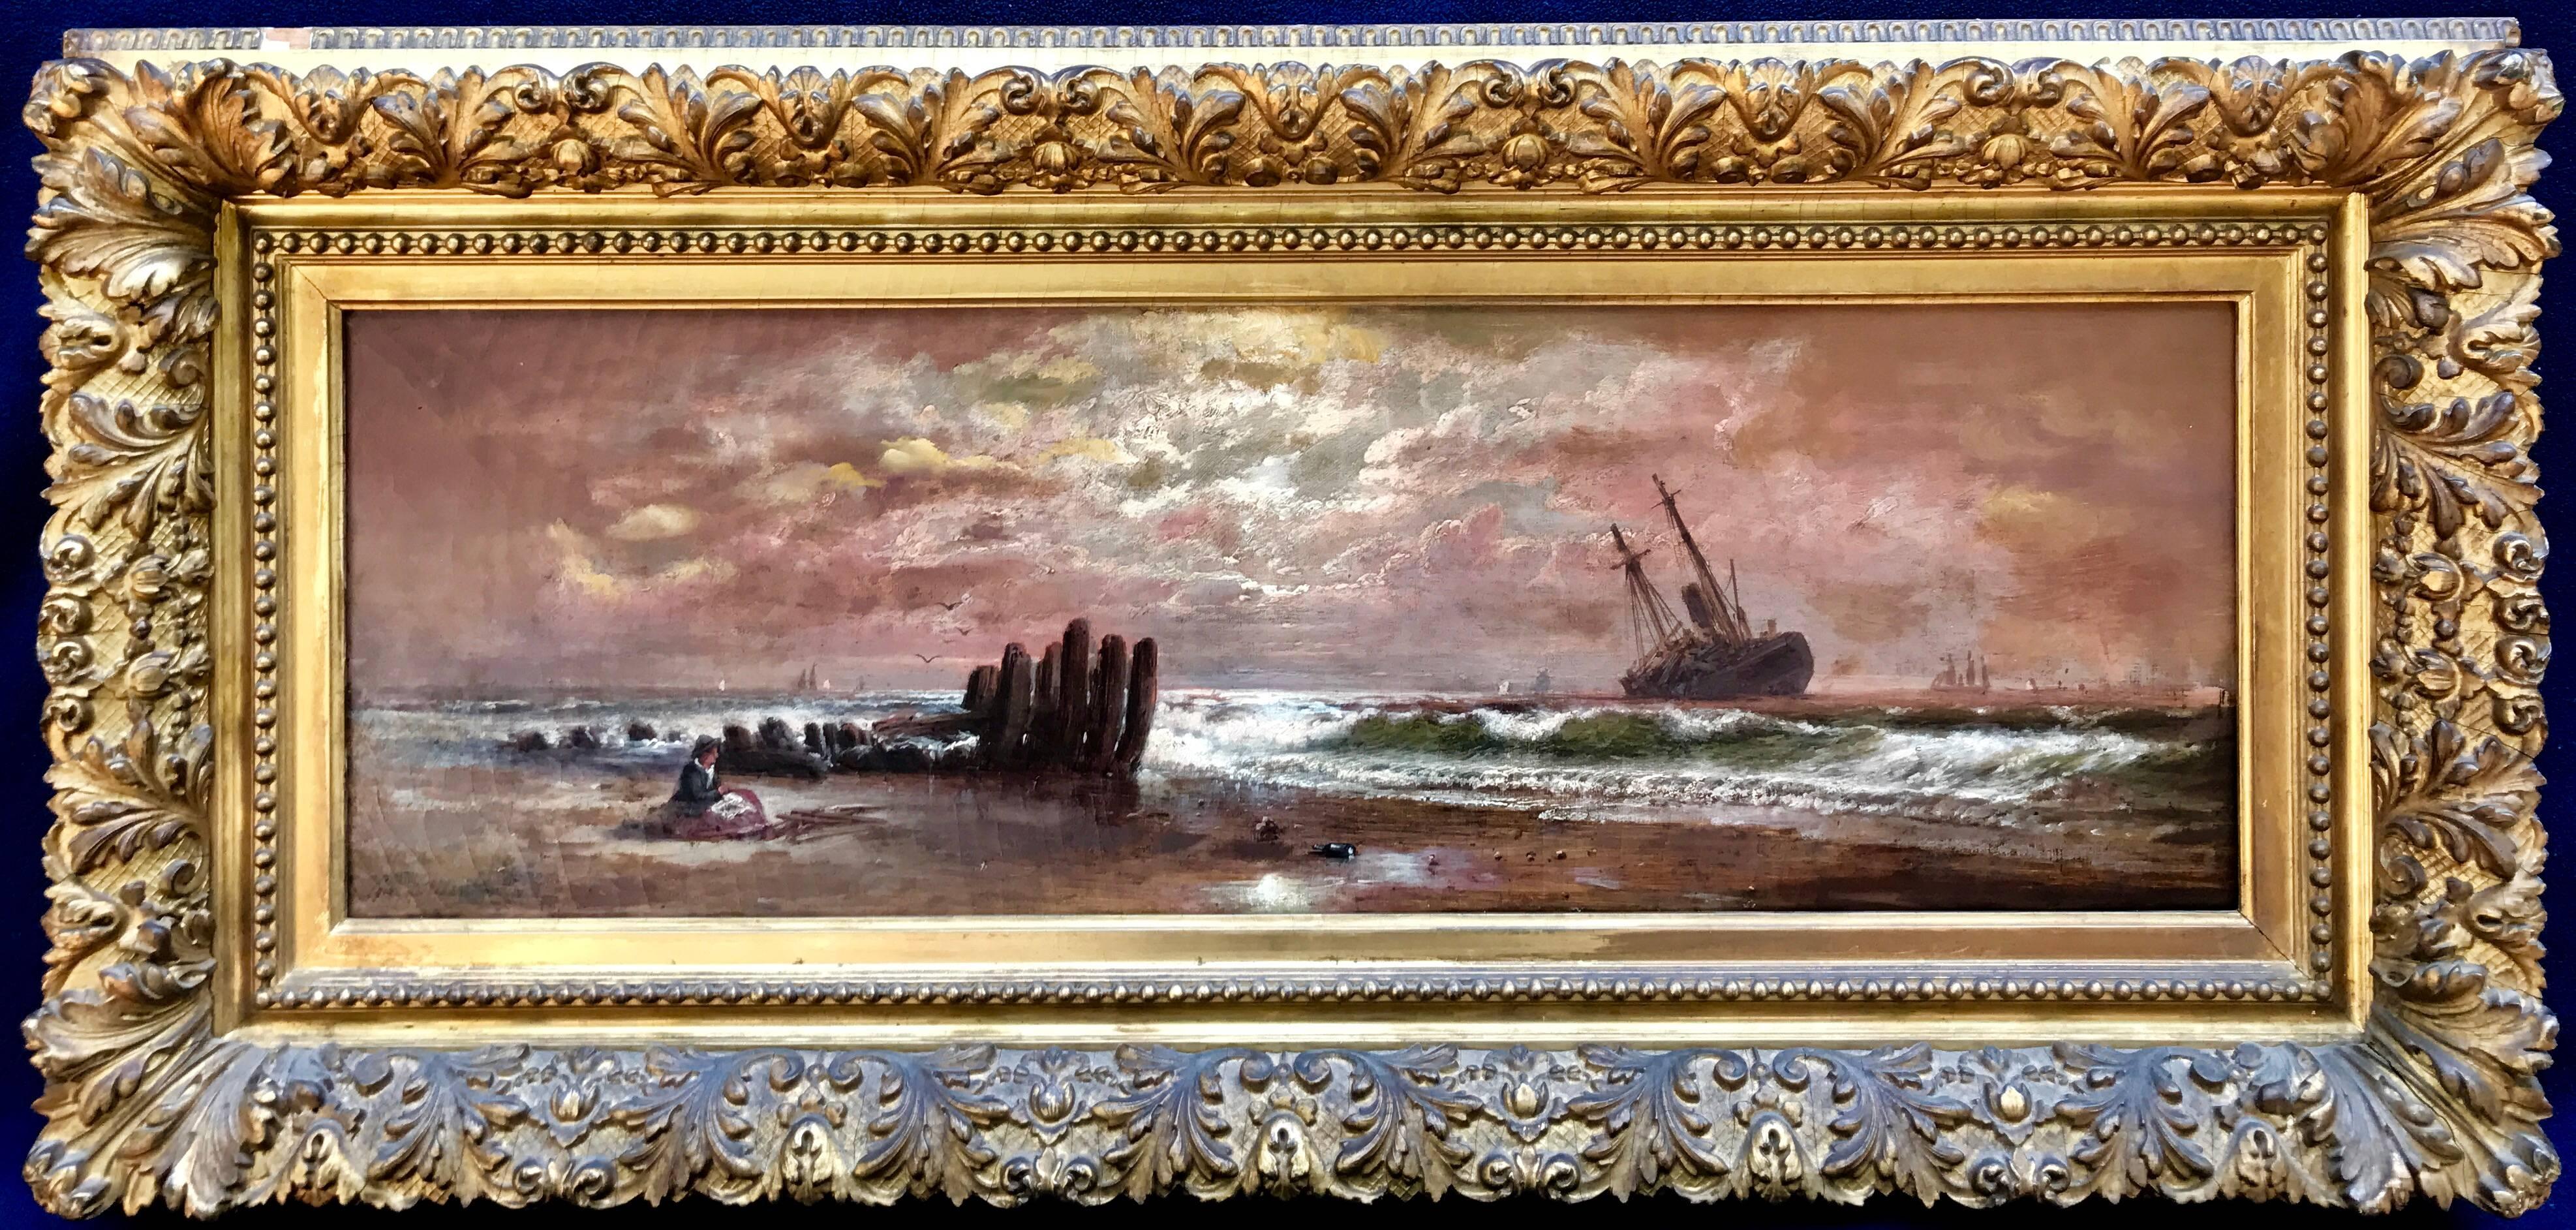 Granville Perkins Landscape Painting - "Wreck at Deal Beach, New Jersey"